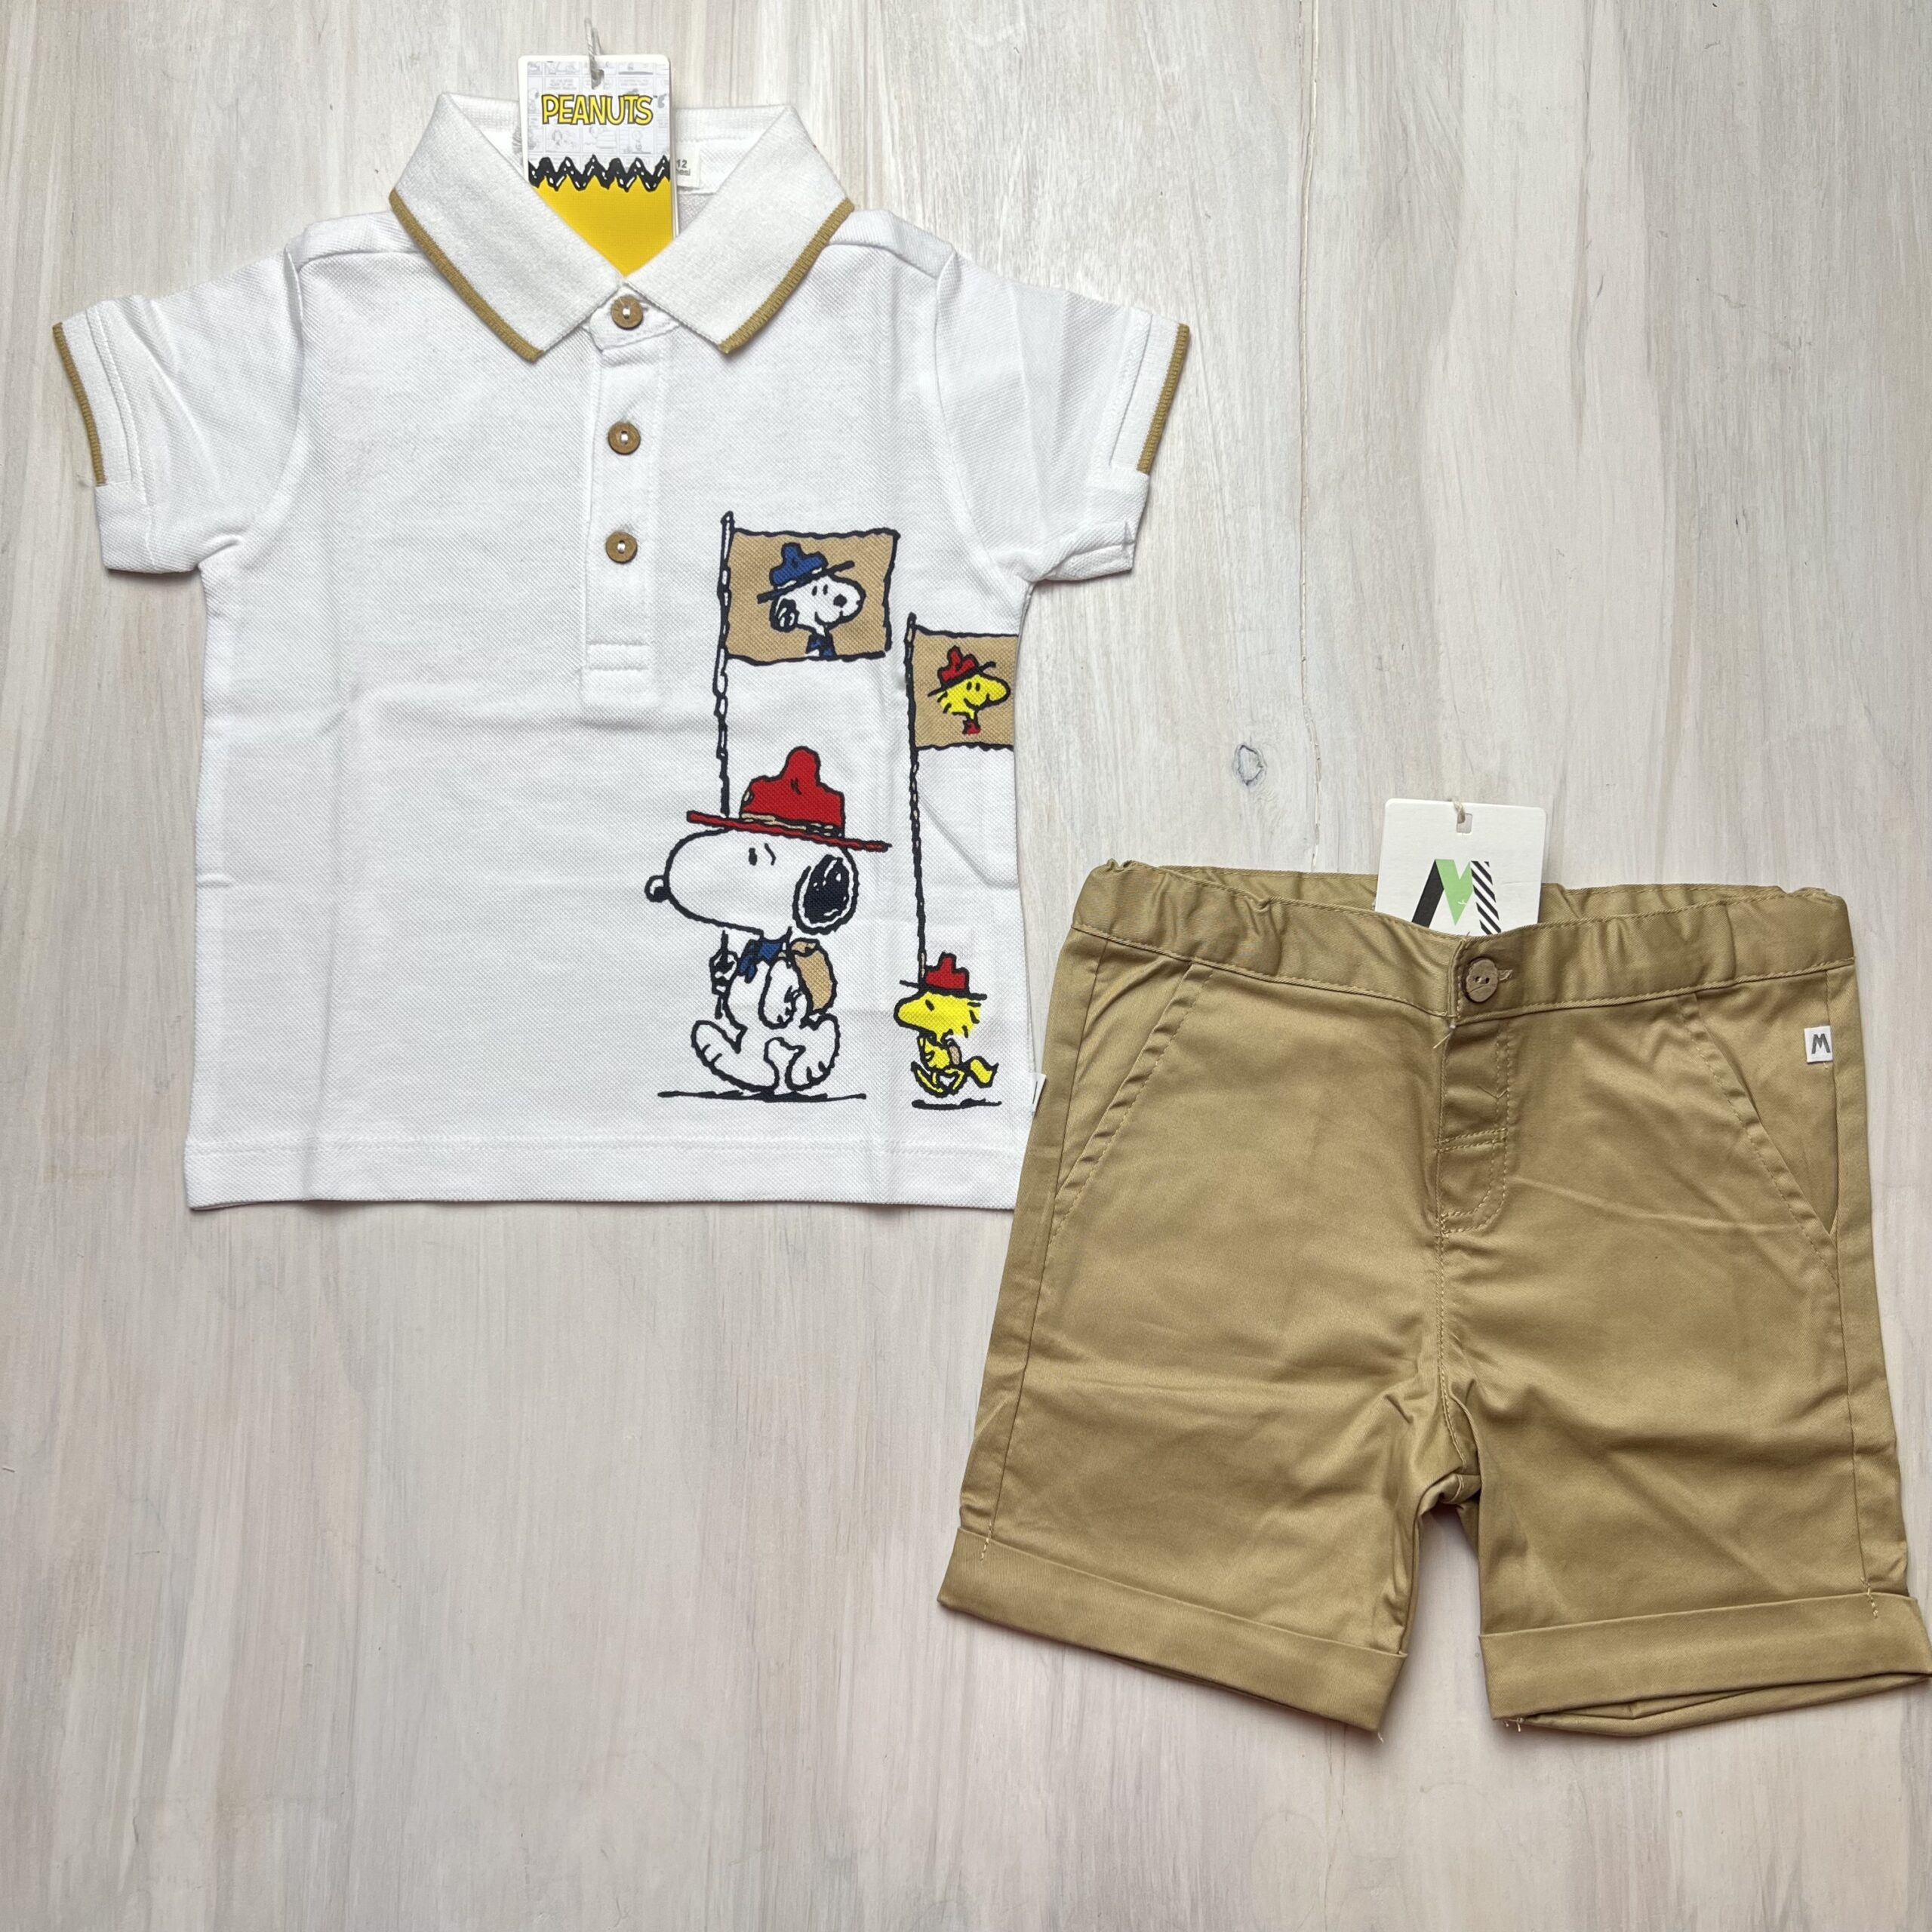 completino-snoopy-bimbo-bianco-beige-polo-melby